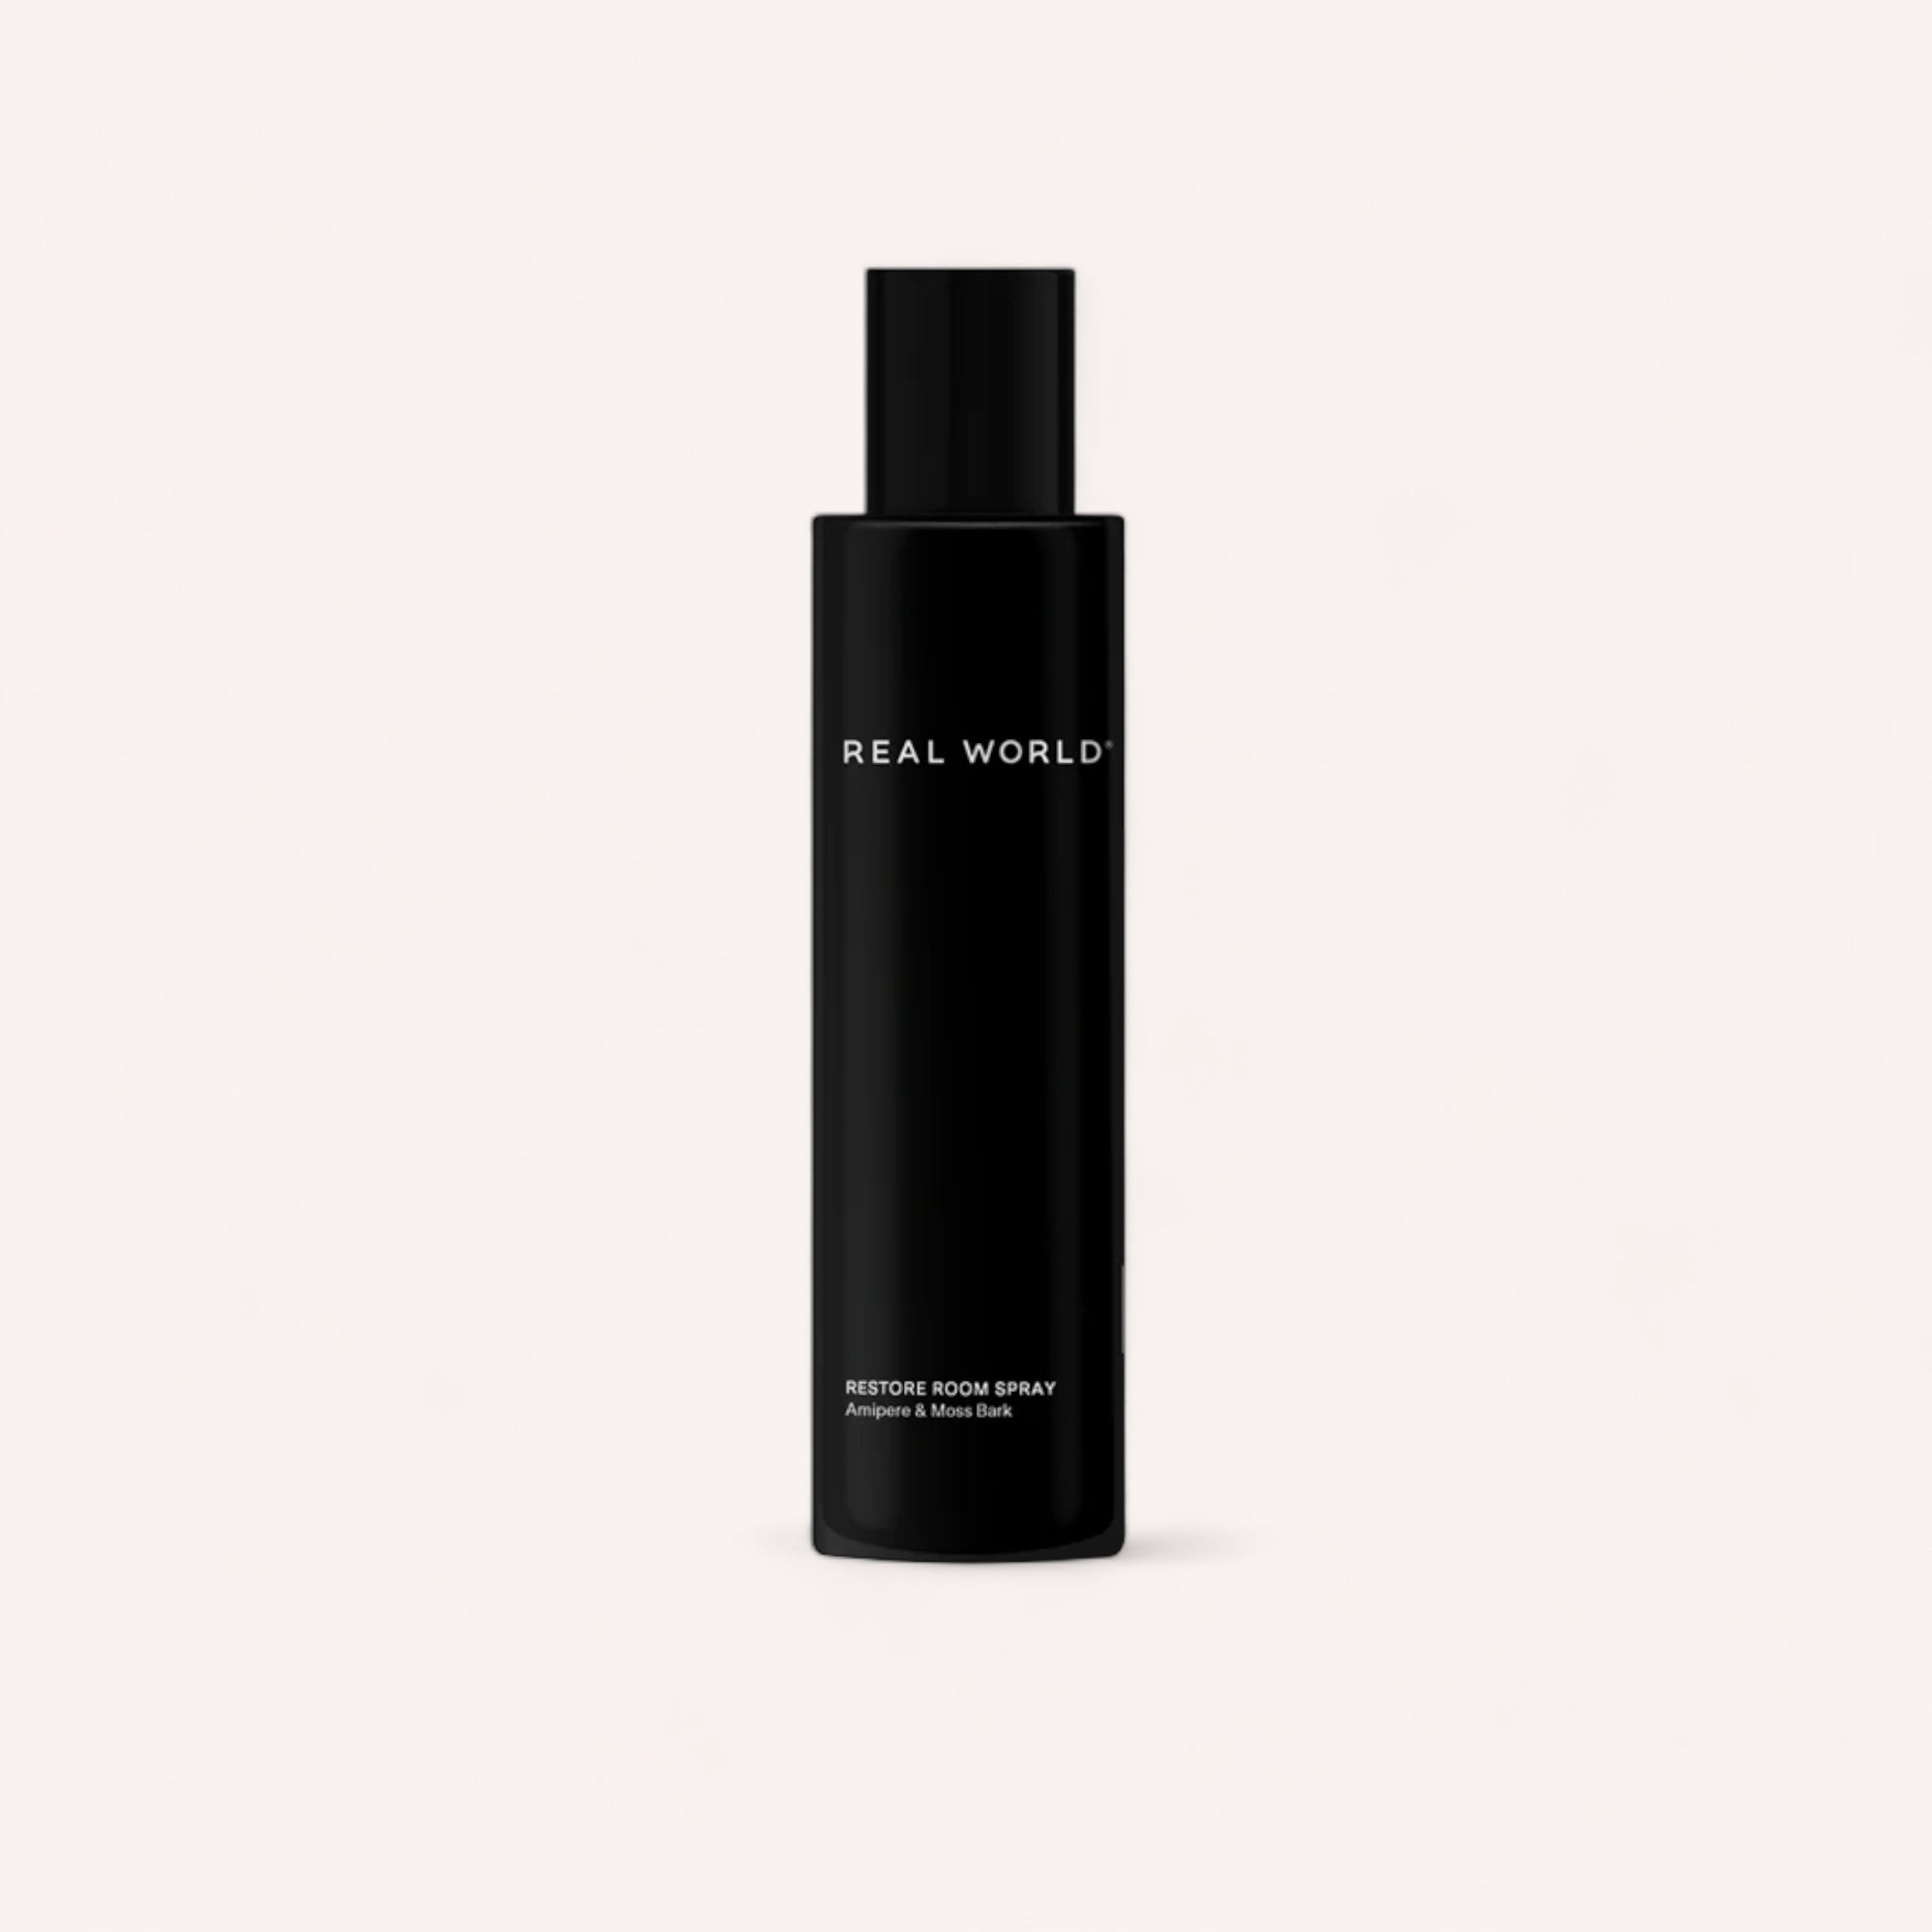 A sleek black bottle with white text labeled "Amipere & Moss Bark Room Spray" fragrance, a Product of New Zealand, against a plain white background by Real World.